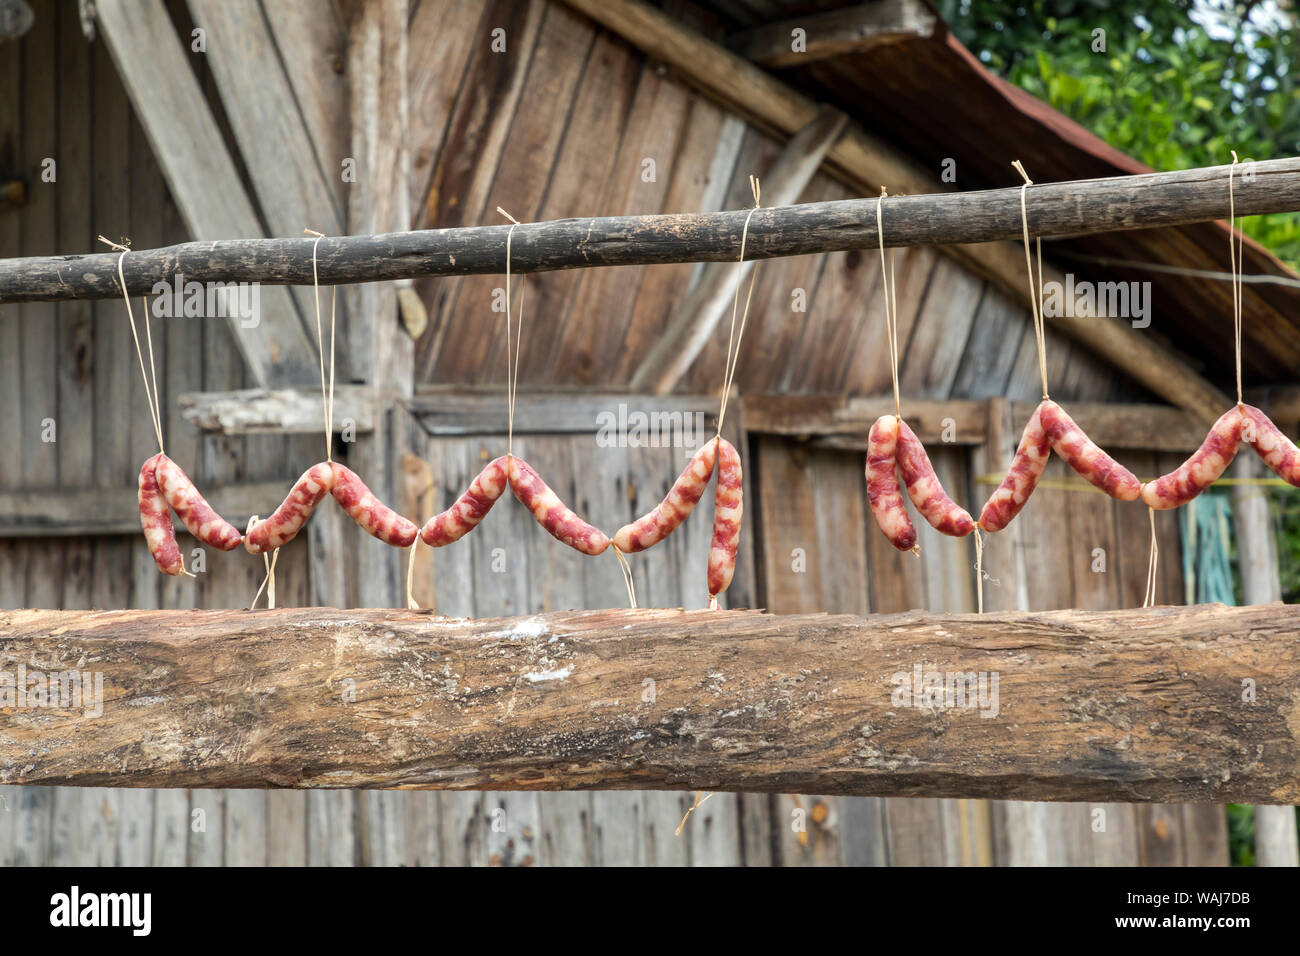 Africa, Madagascar, Toamasina marketplace. Sausages are strung up to dry above a fence. Stock Photo